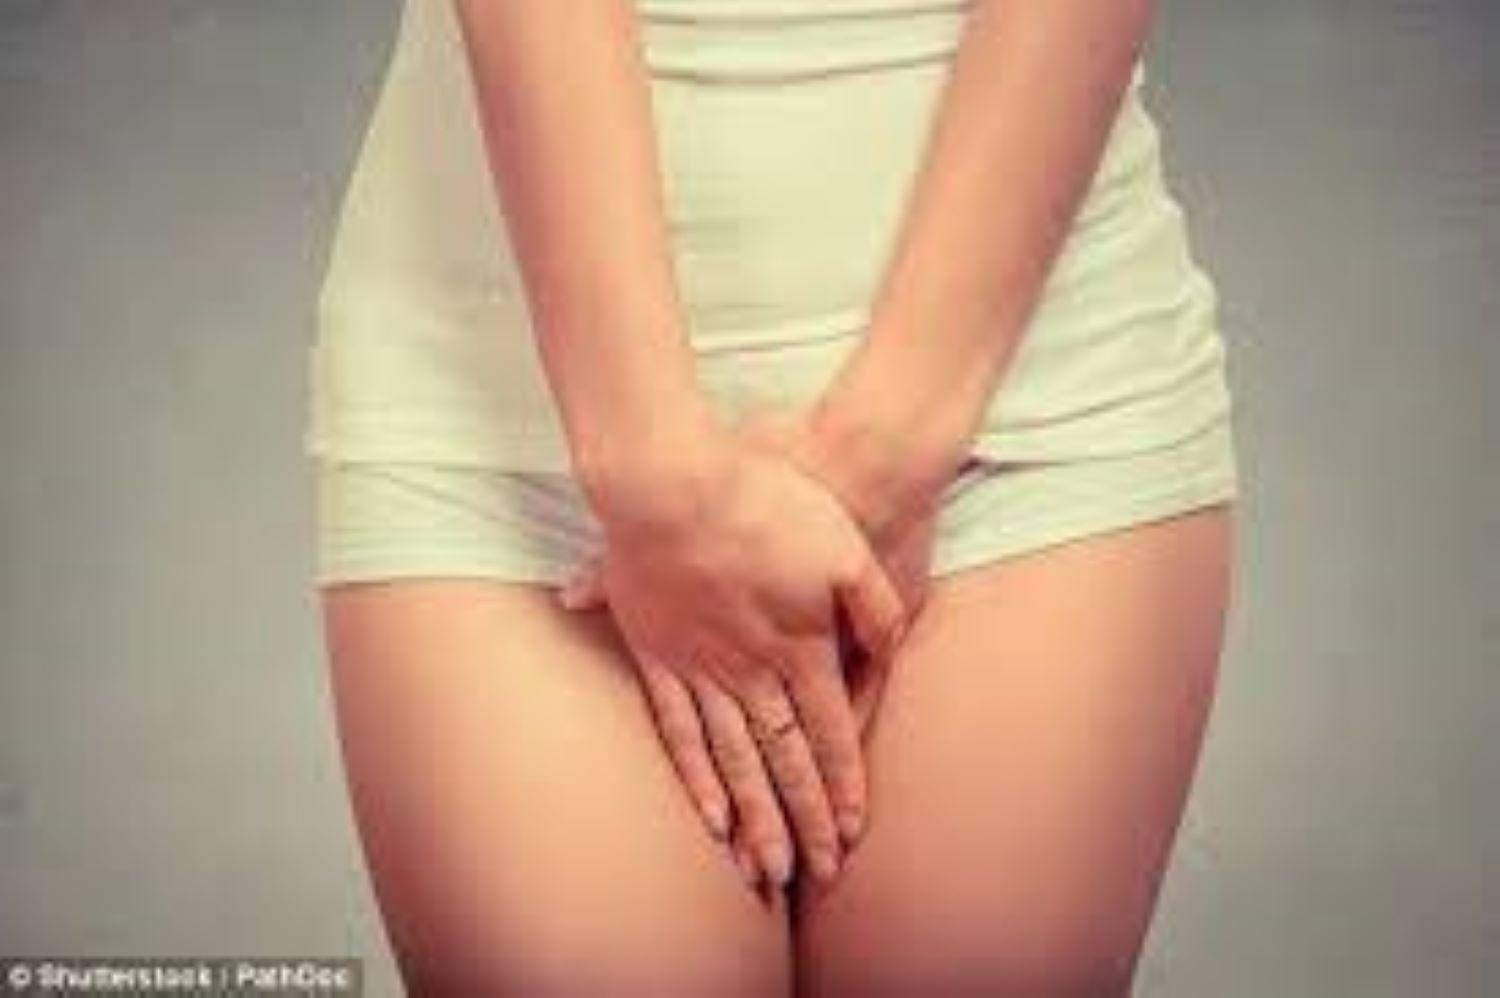 WARNING Dont remove your pubic hairs, Gynaecologist urges women pic